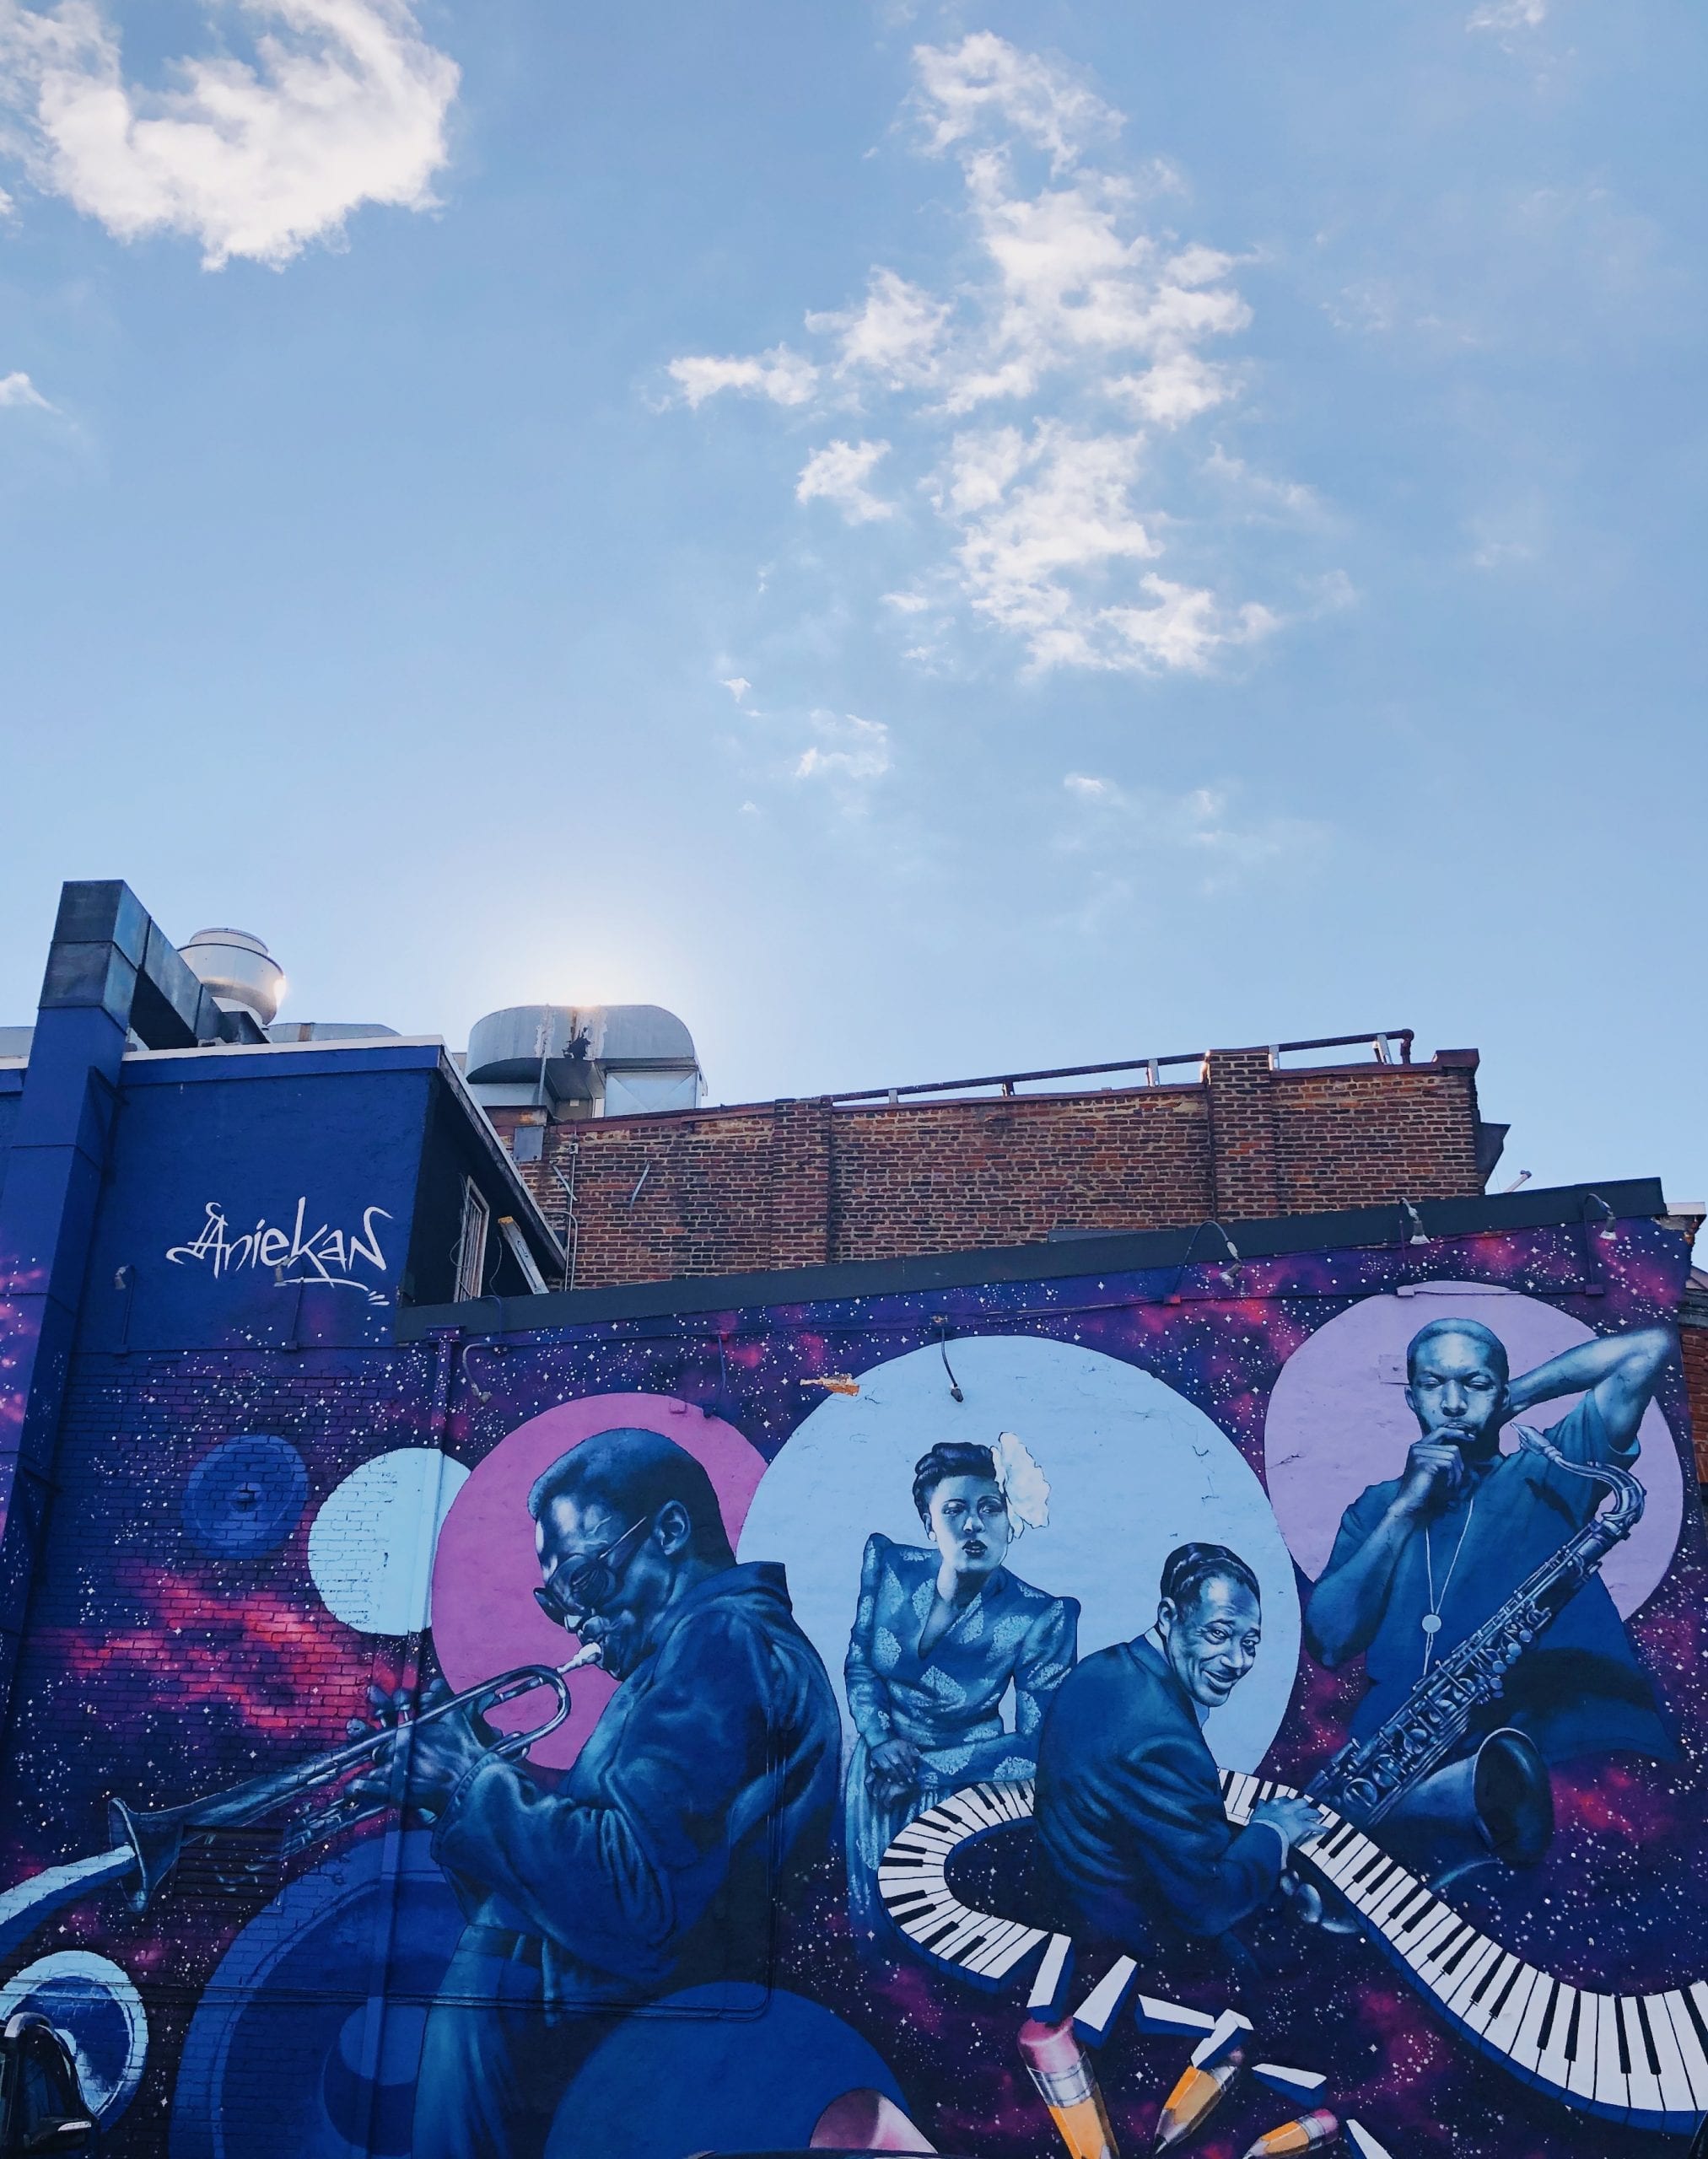 A blue-themed mural on the side of a building with an abstract keyboard and musicians 